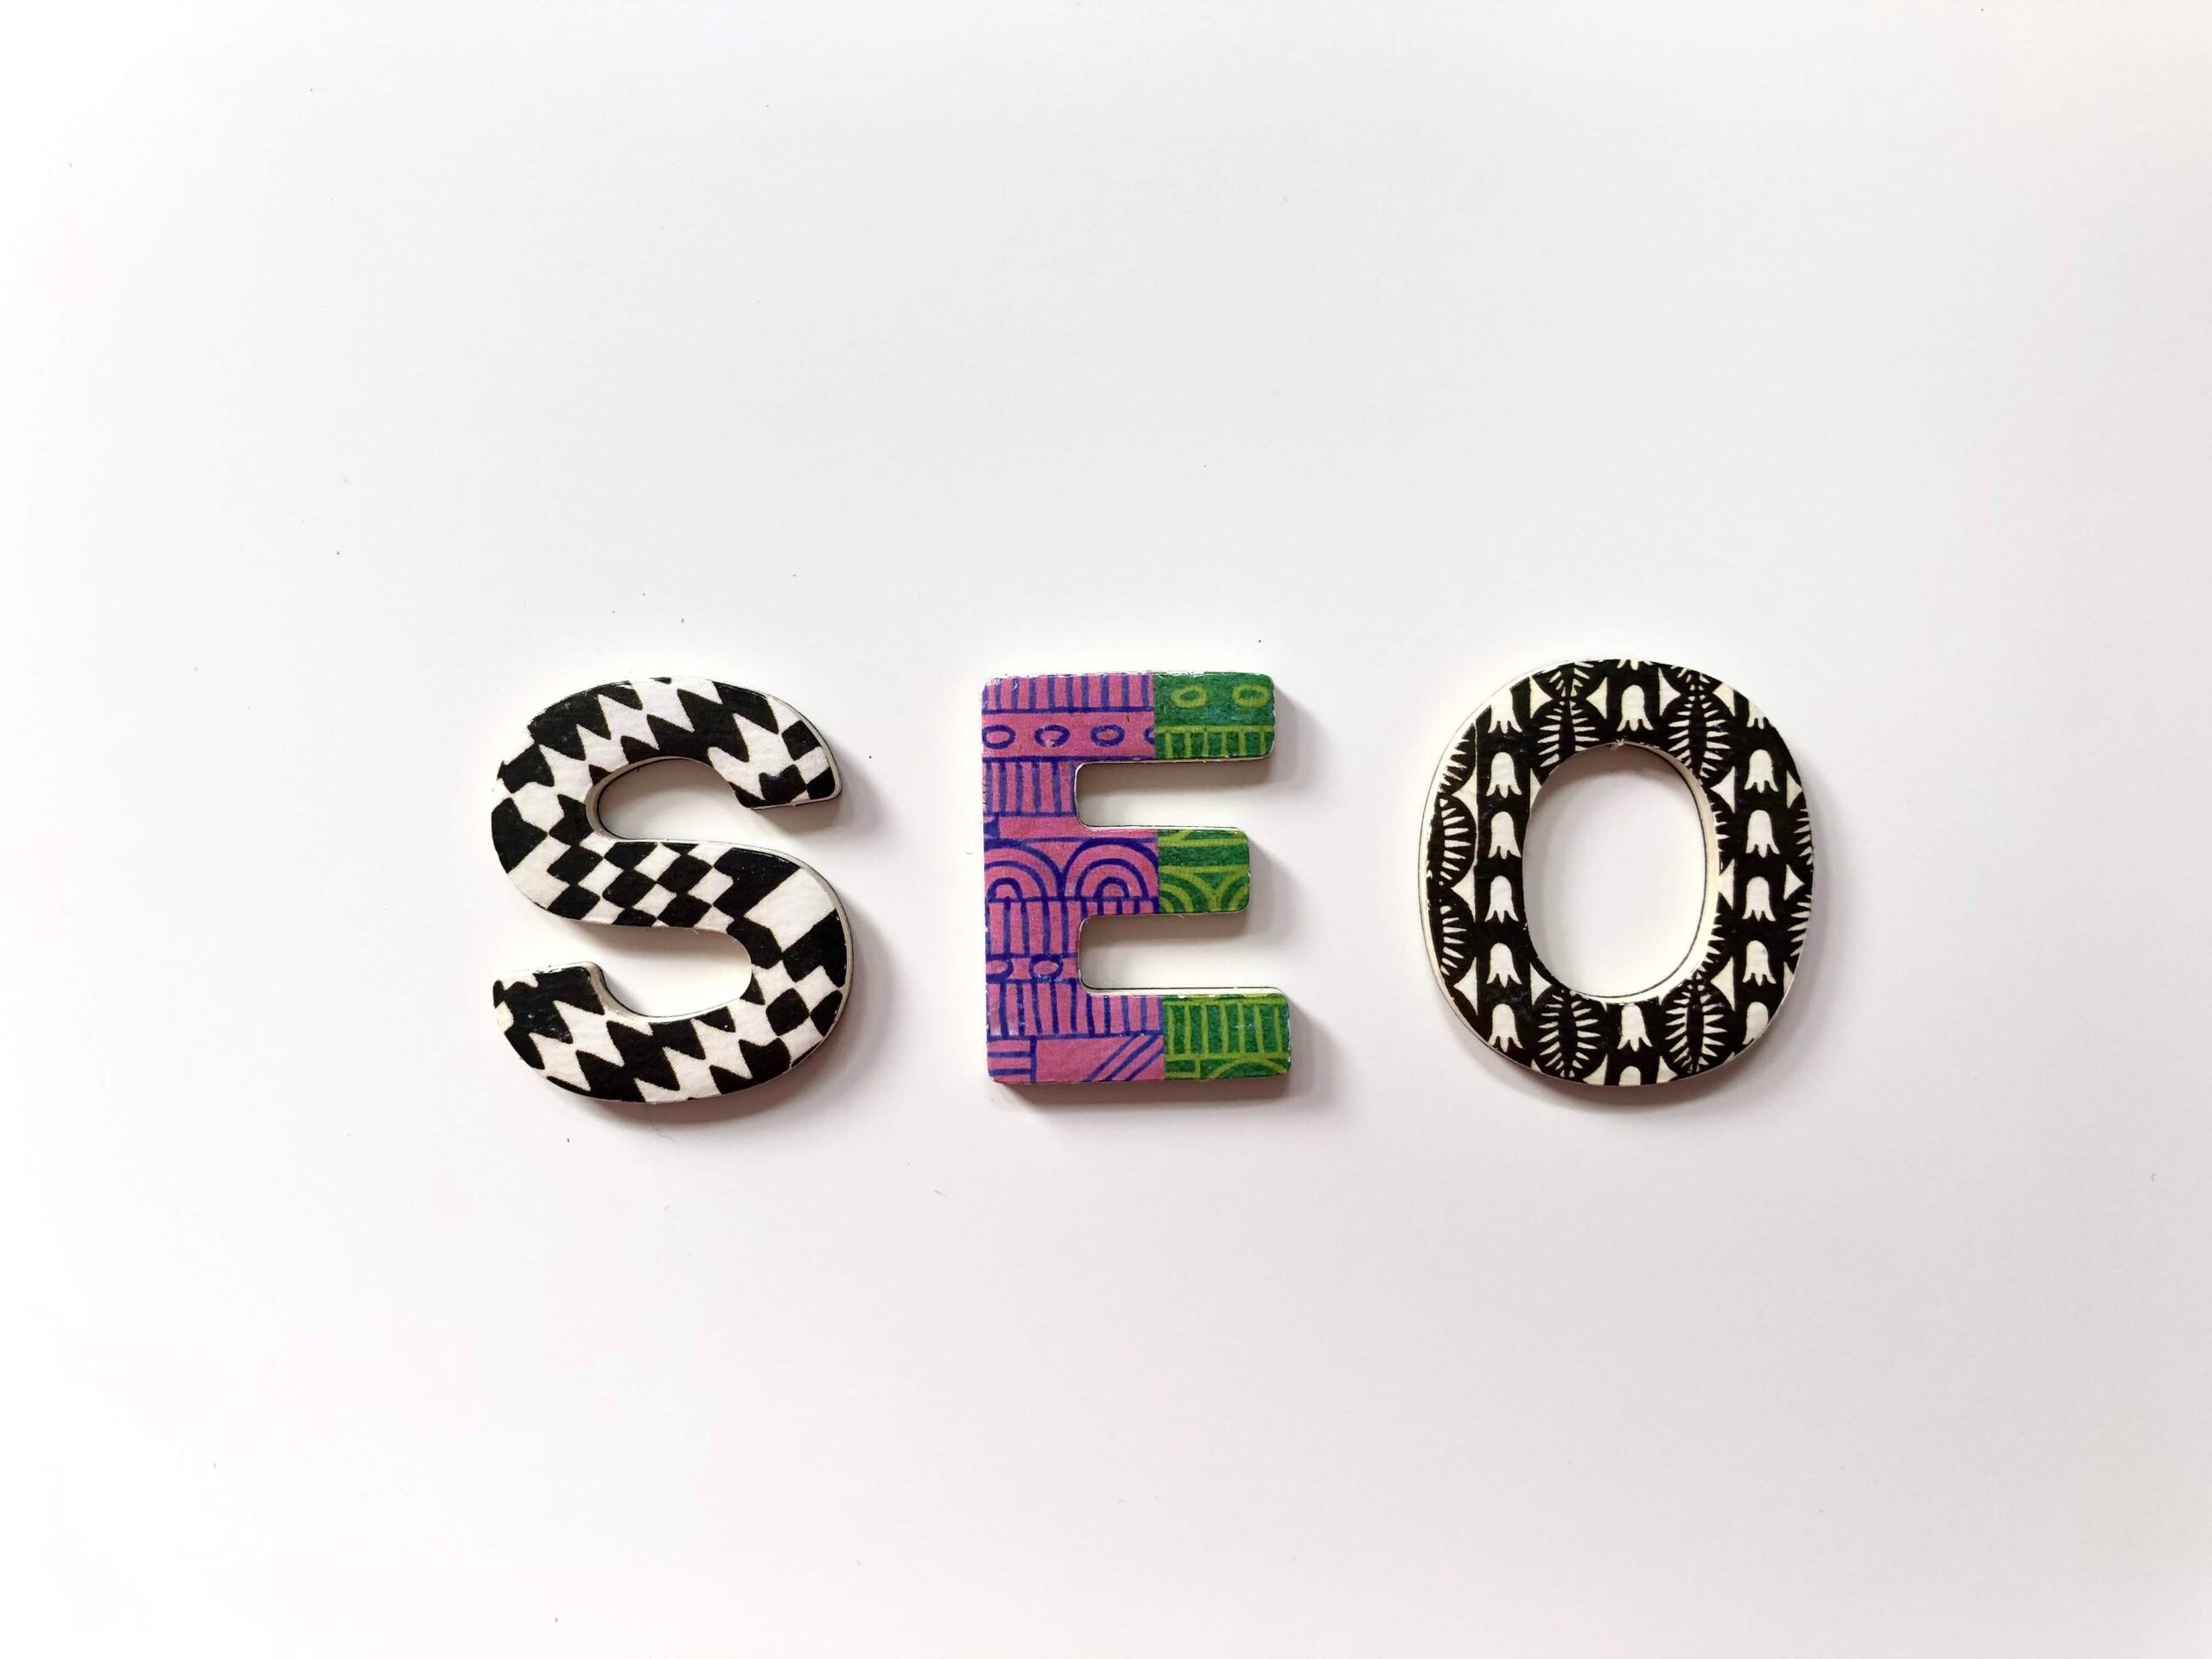 text reads "SEO"